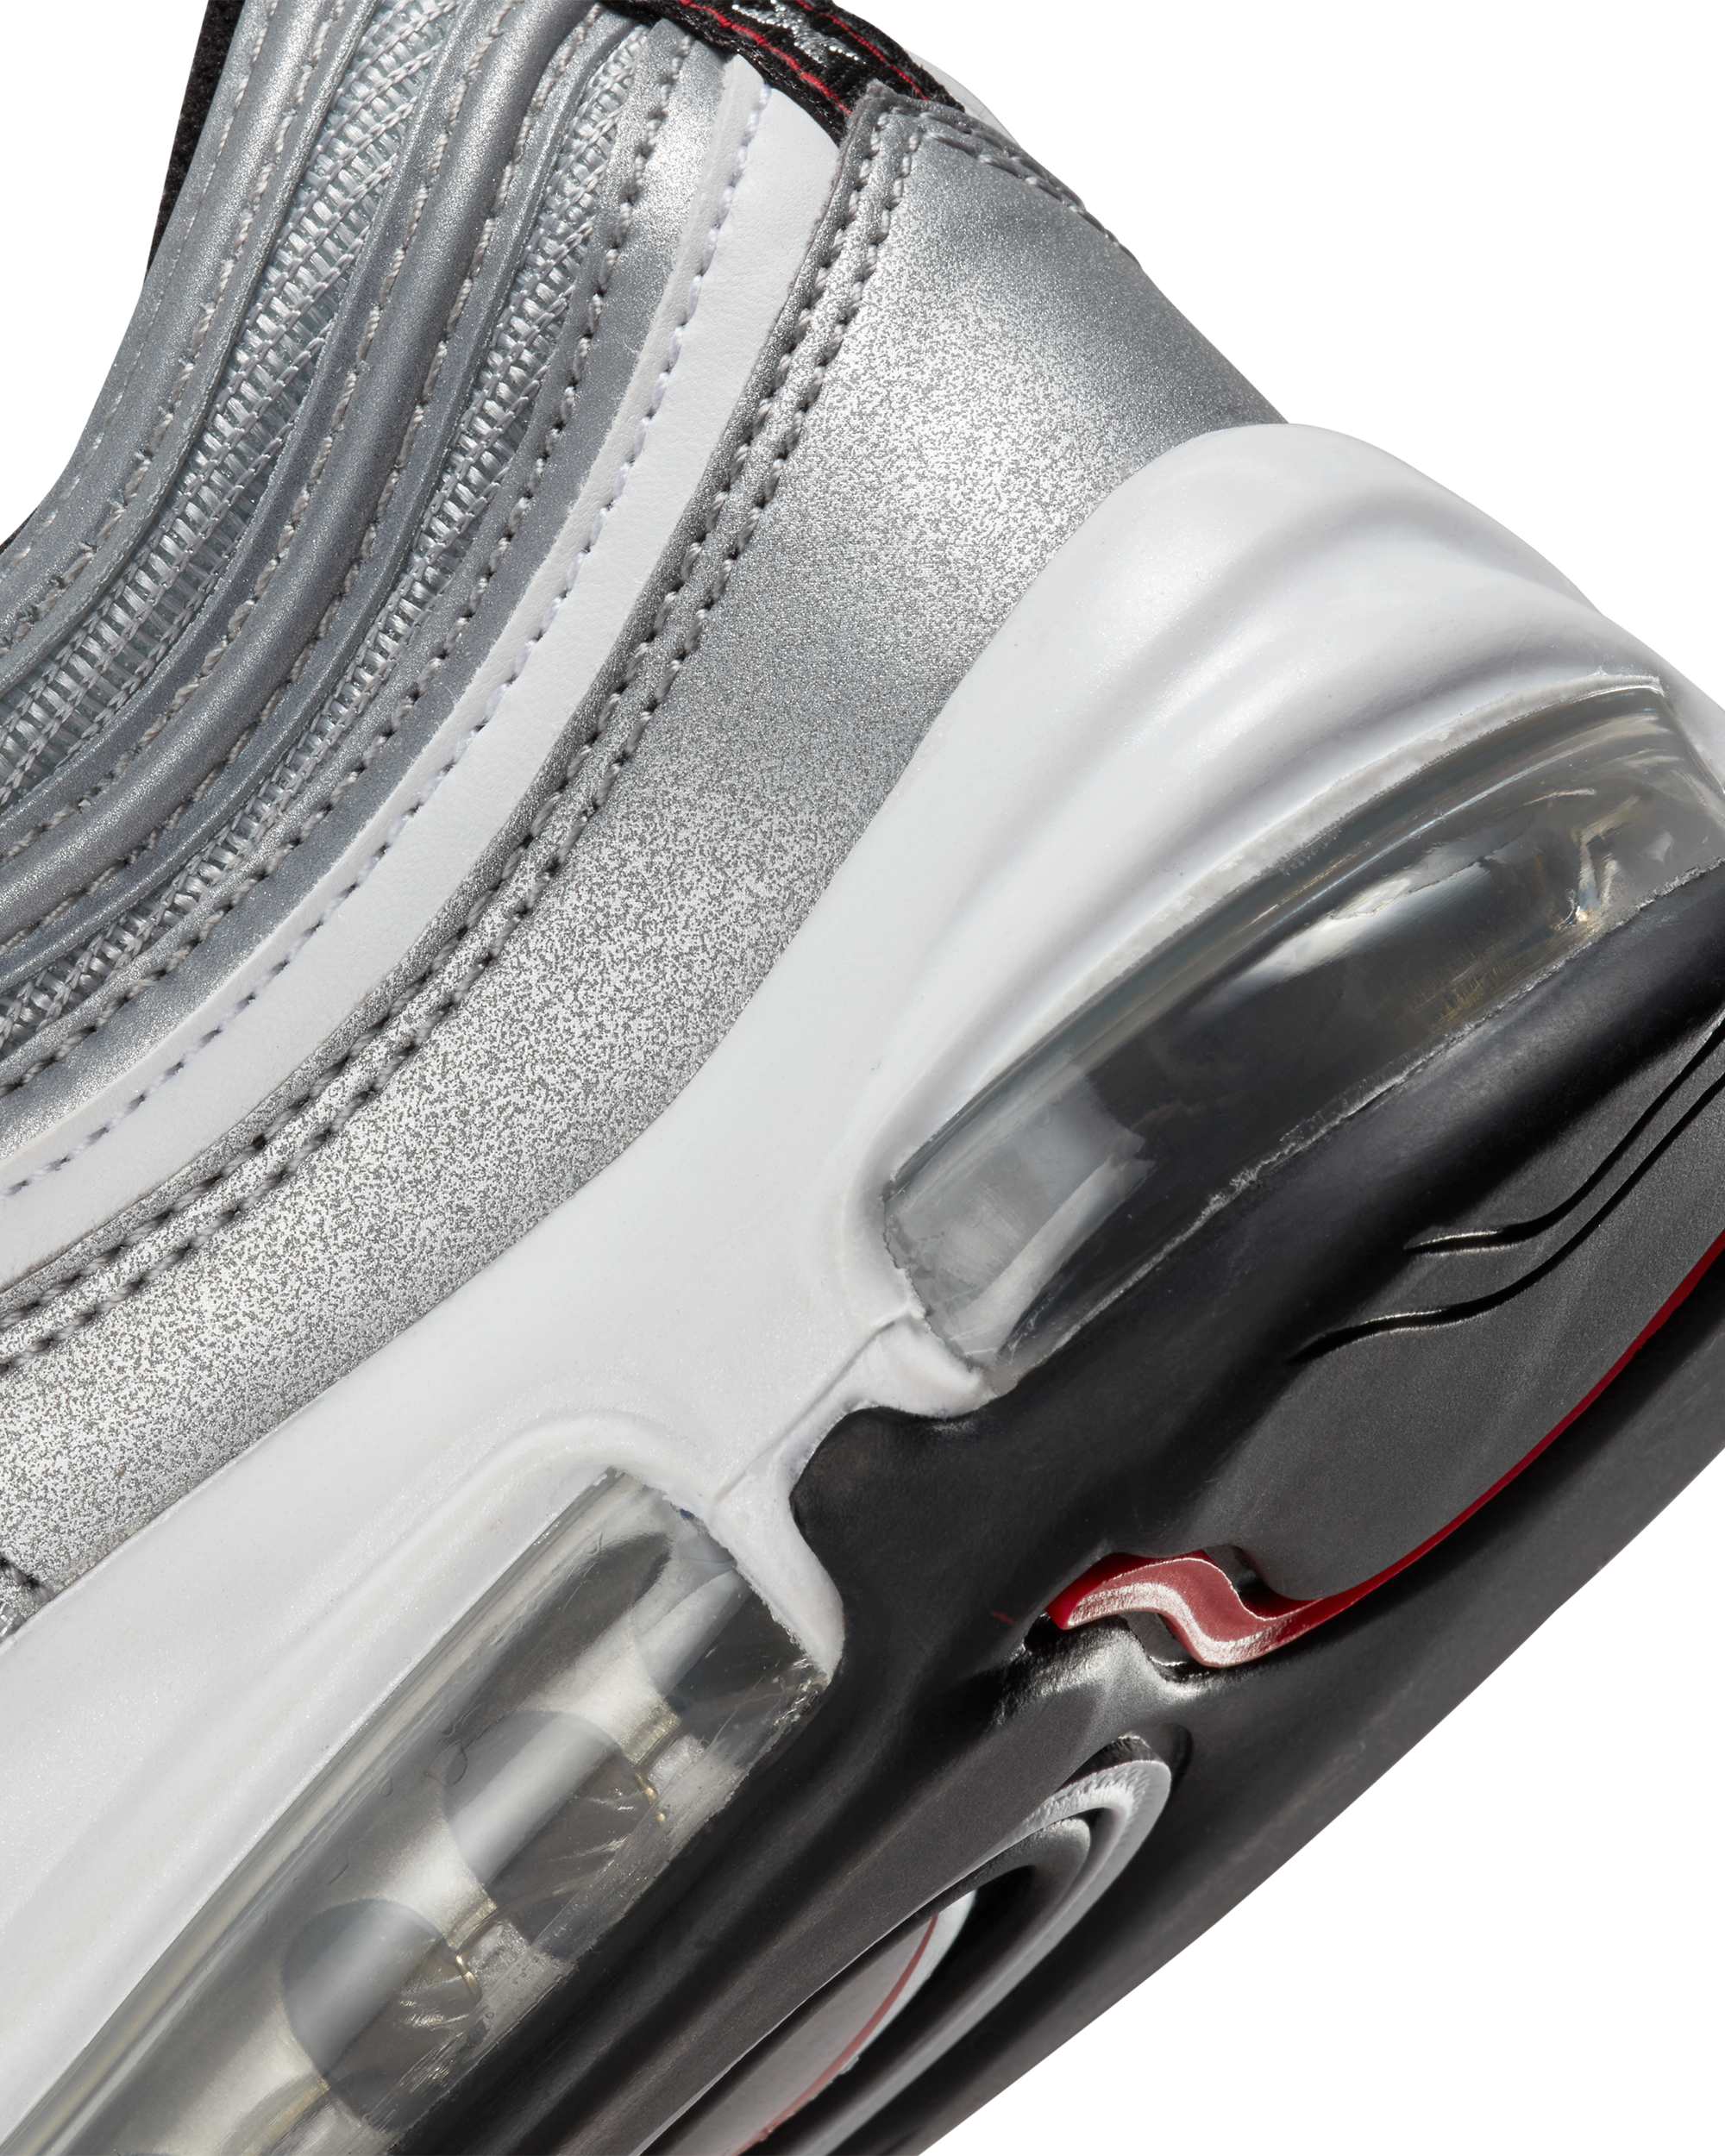 Womens Air Max 97 OG "Silver bullet" - Silver / Red